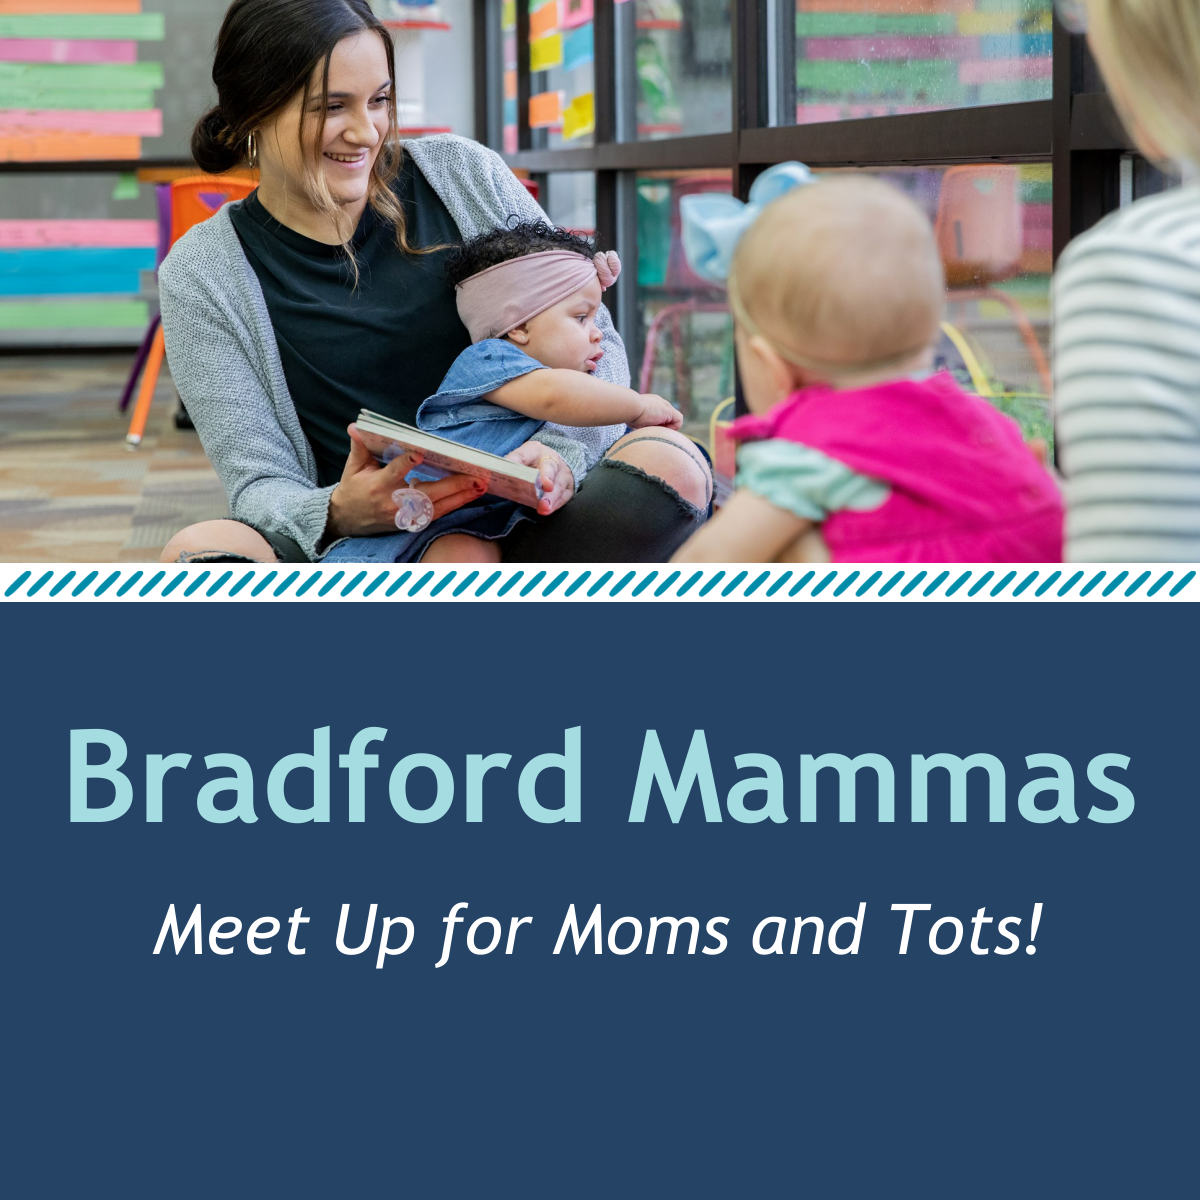 Photo of woman reading to 2 small children. Text reads: Bradford Mammas. Meet Up for Moms and Tots.